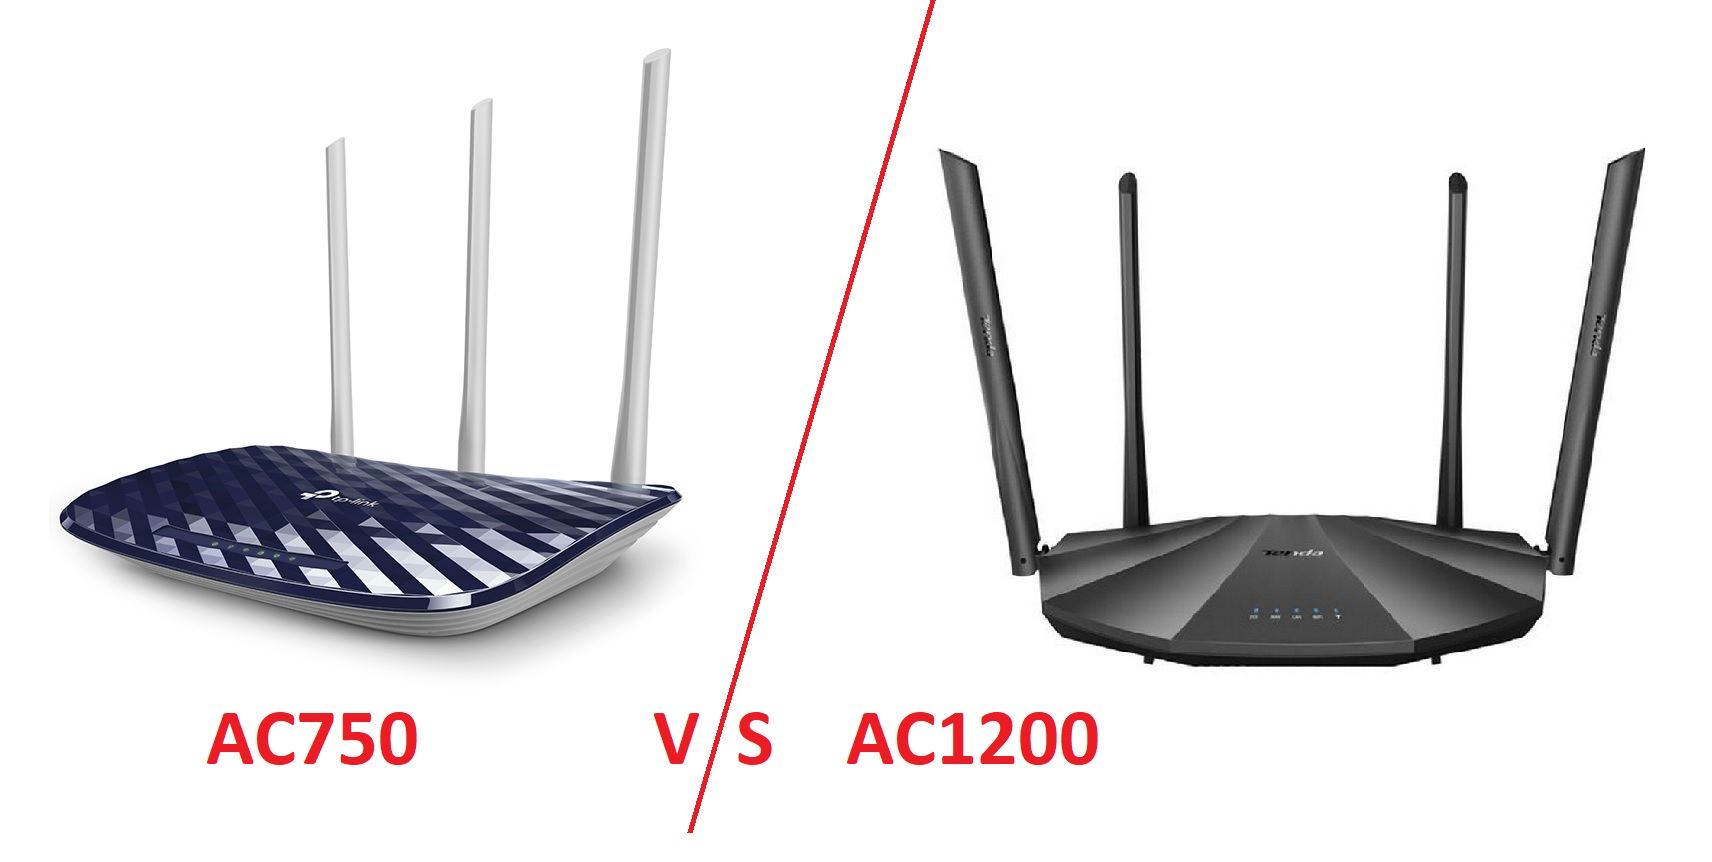 TP Link AC750 vs AC1200 - Which is better?